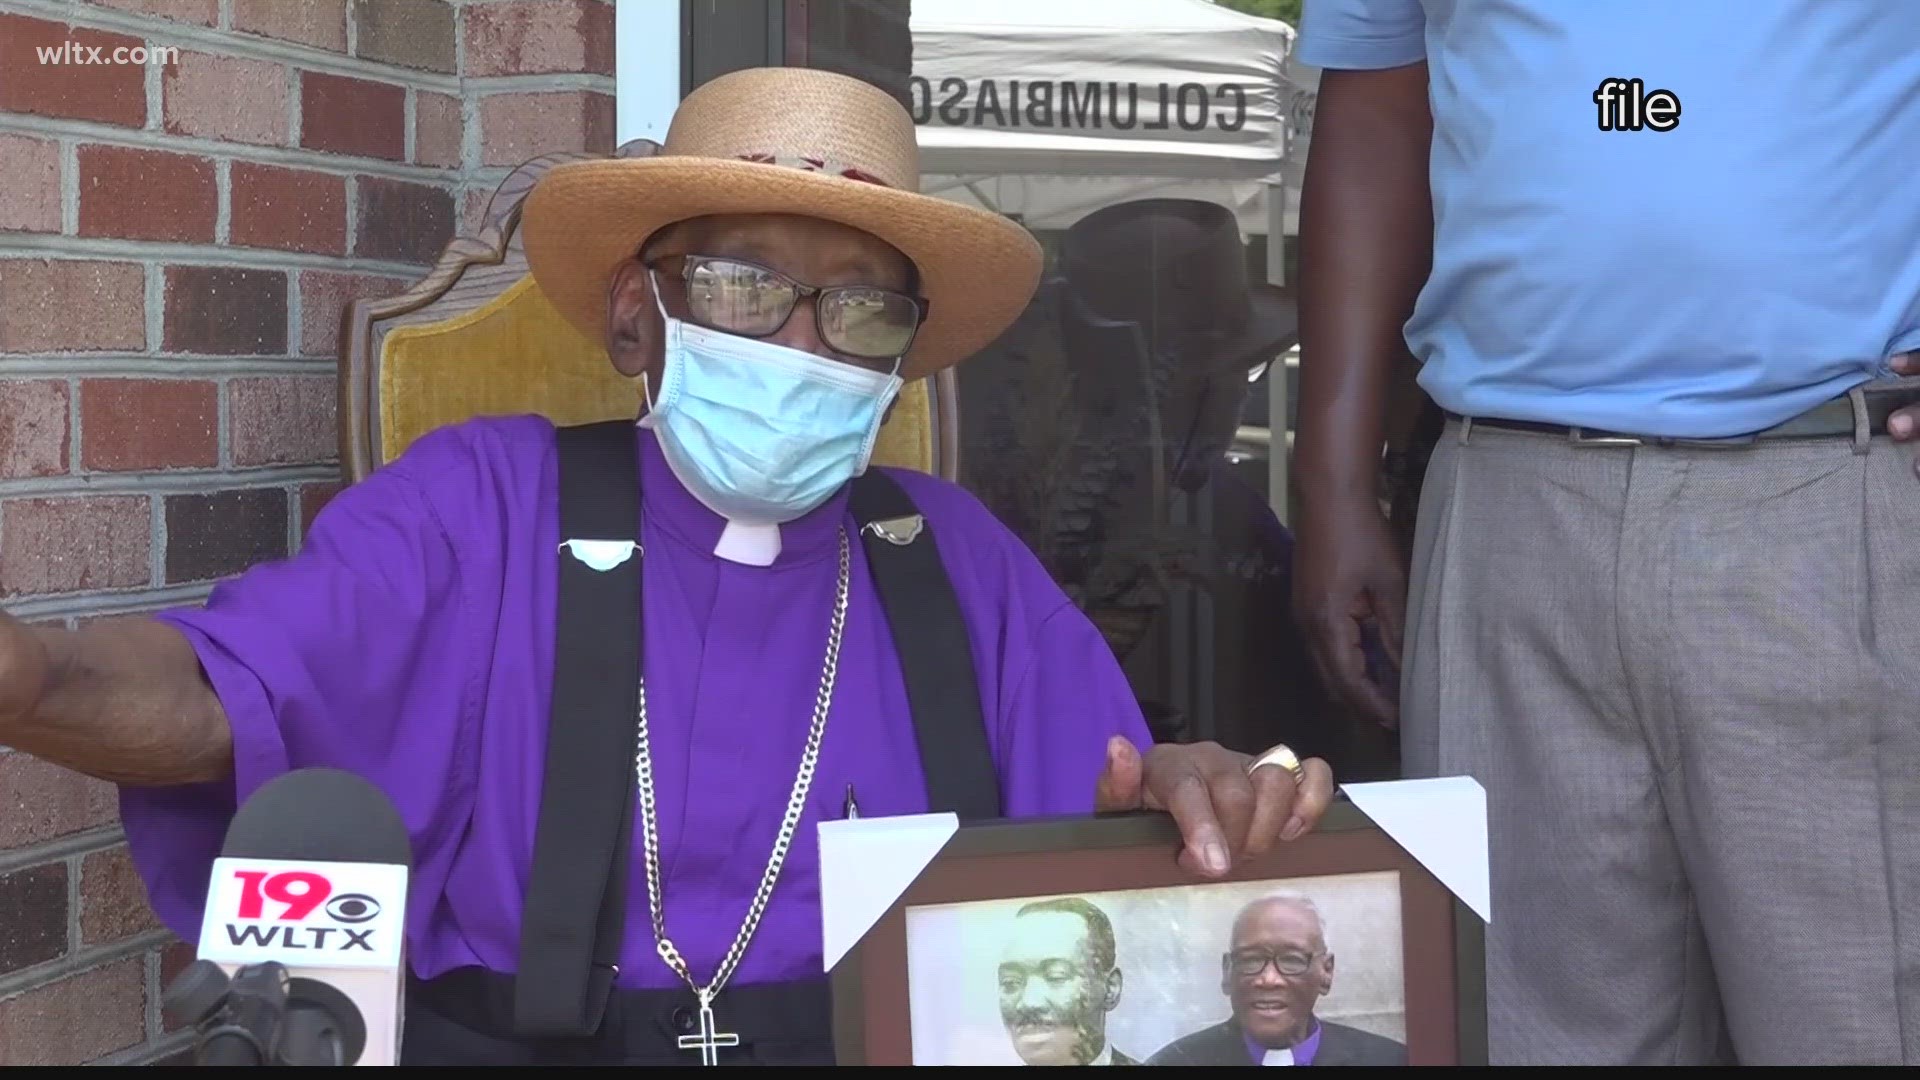 Bishop James passed away on April 18th, he was 102 years old.